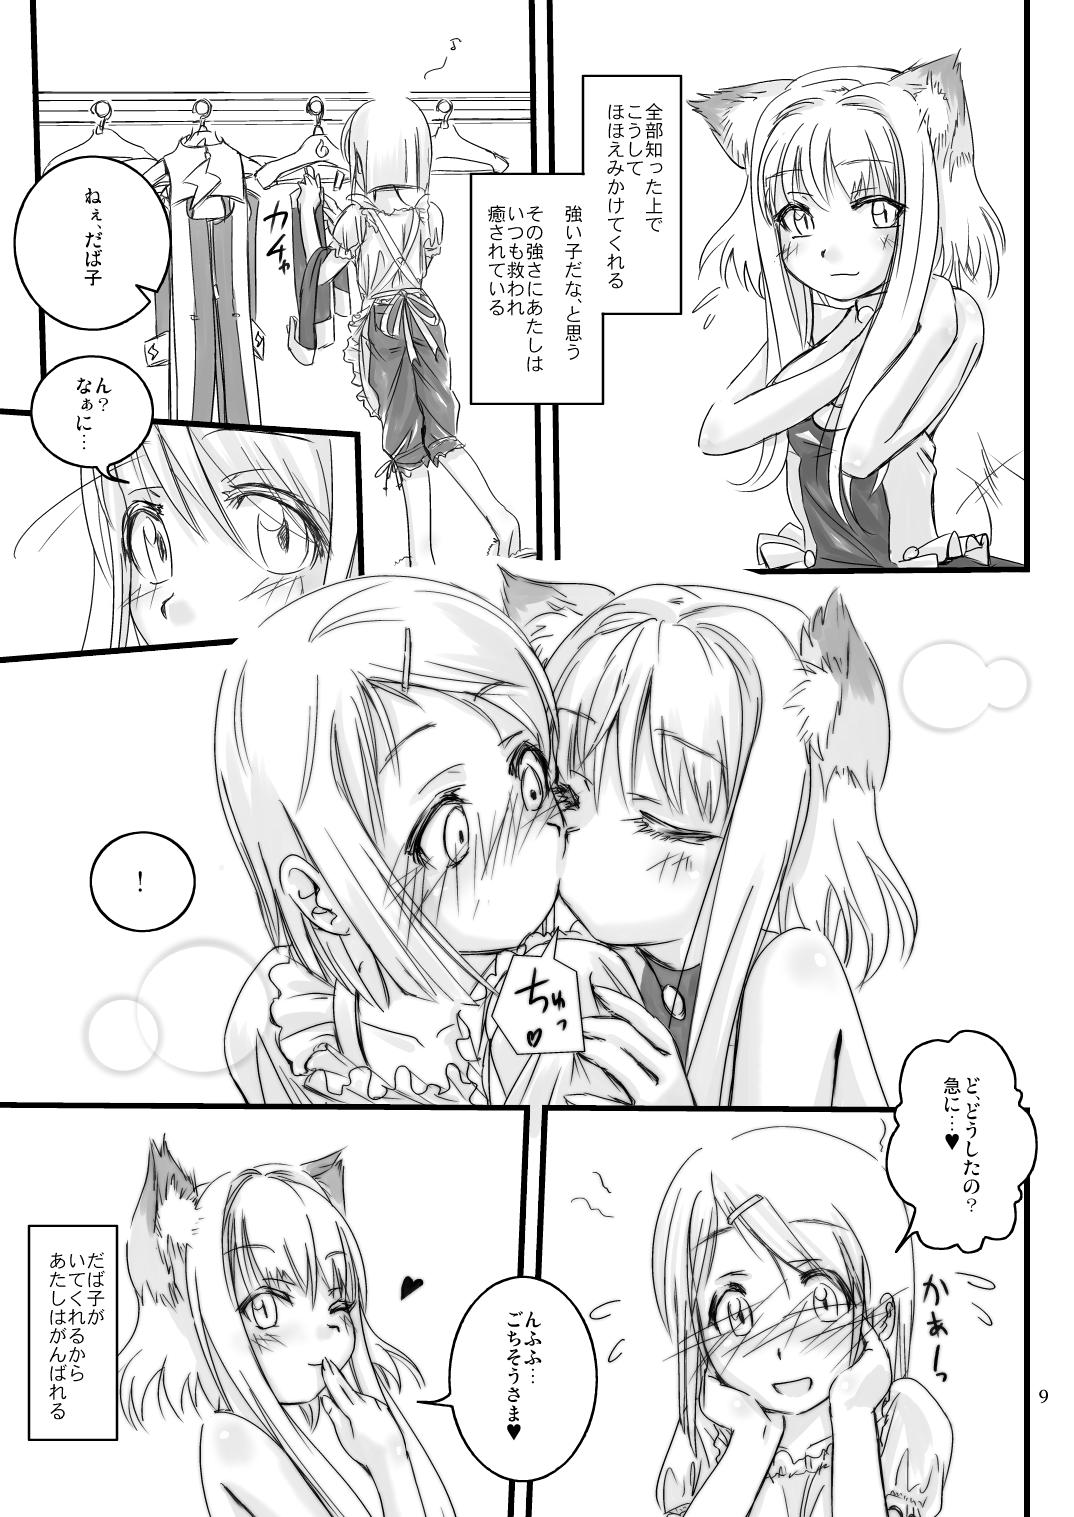 LoveConnect 1 12